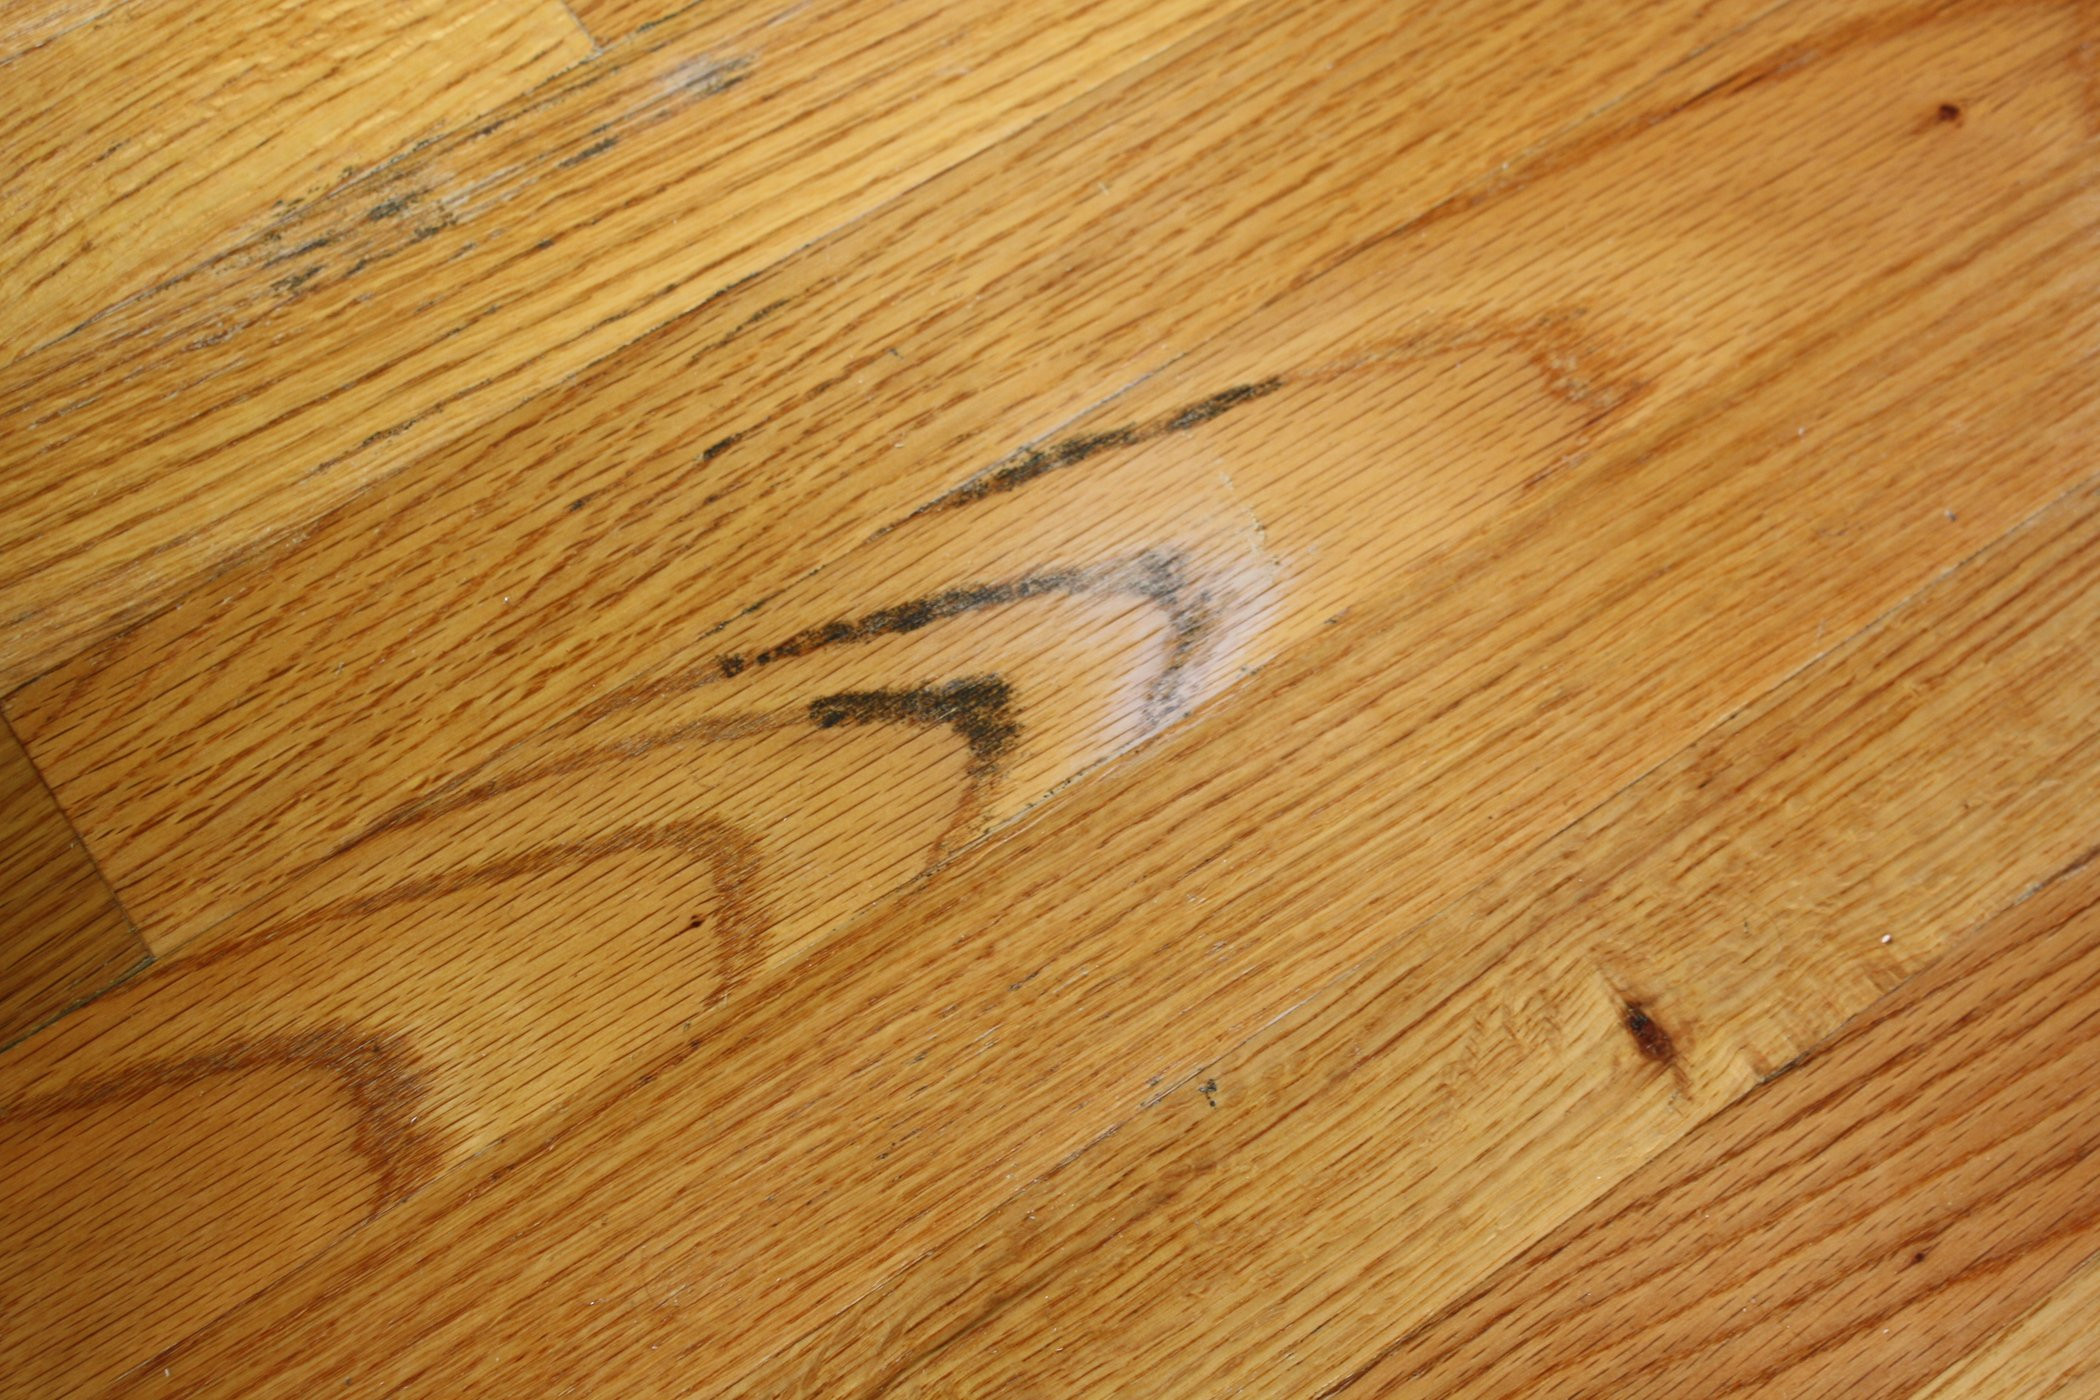 How to Refinish Hardwood Floors Yourself Of How to Clean Mold From A Wood Floor 4 Steps Regarding Fylcmqyg7dyp6ds